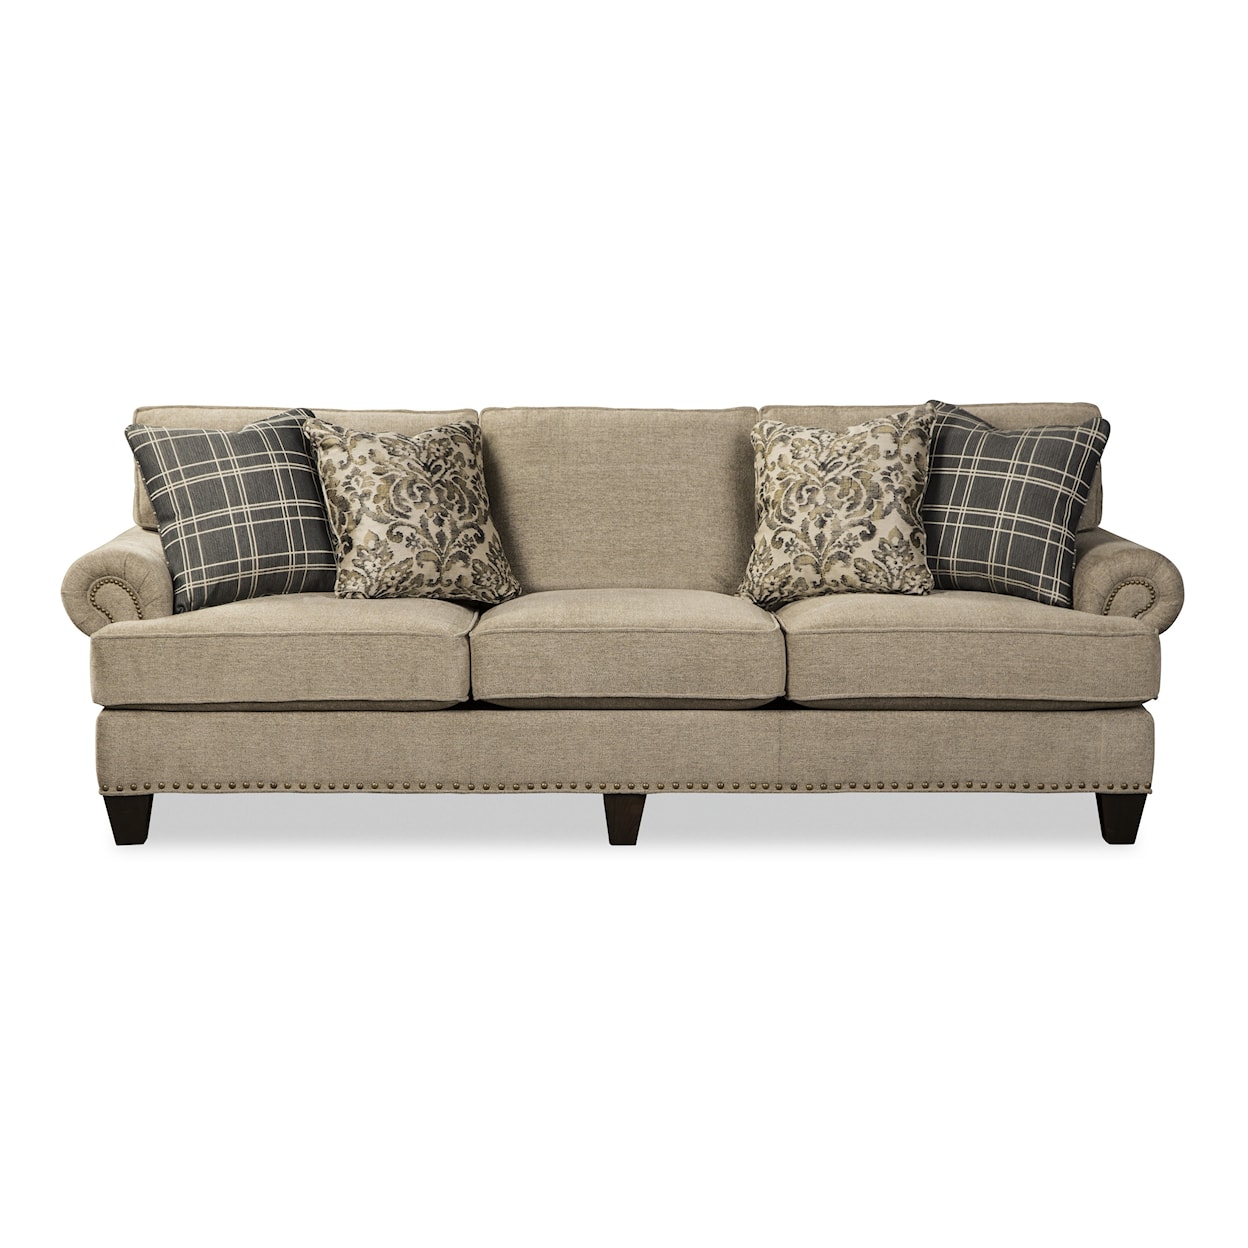 Craftmaster C9 Custom Collection Extended Sofa